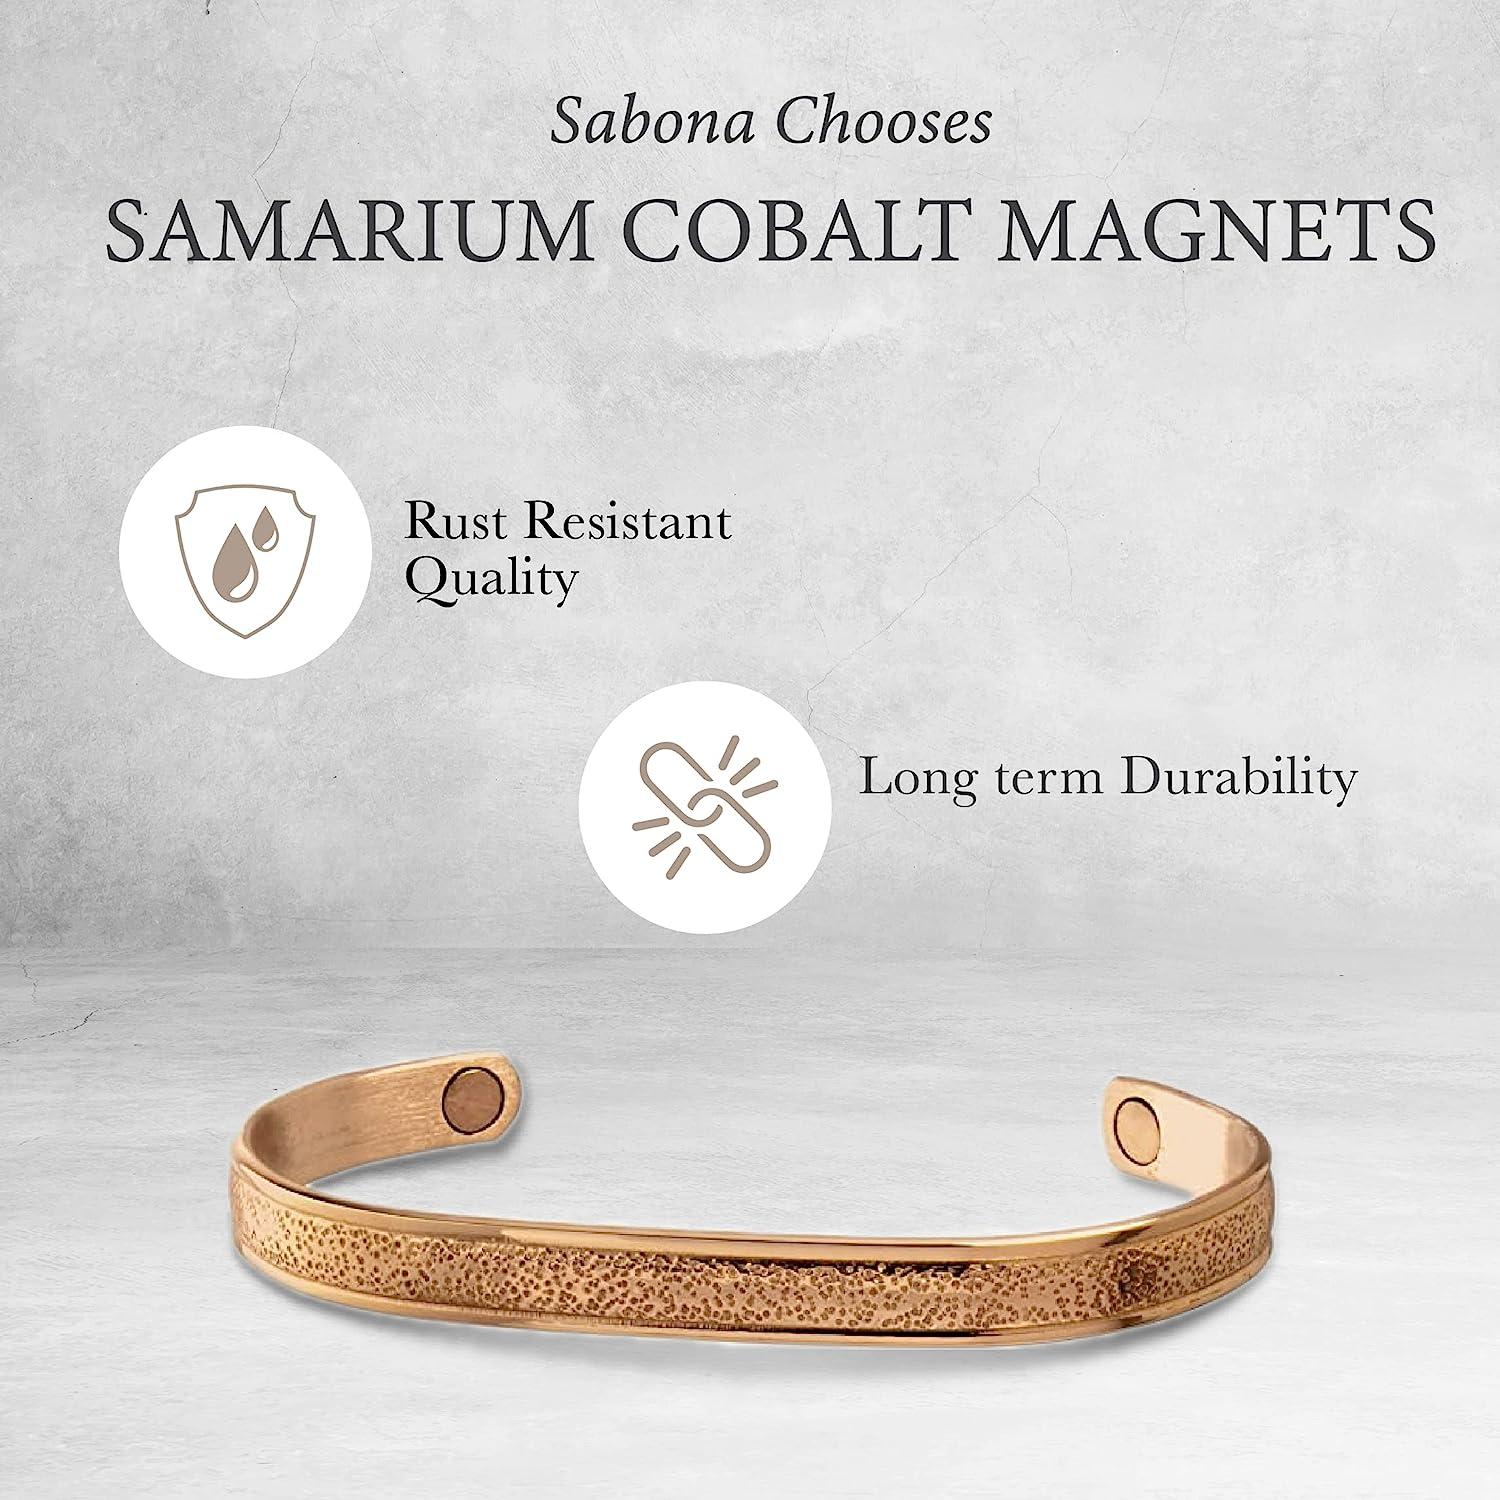 Sabona Two Tone Steel Magnetic Bracelet, Stainless/Gold Bracelet,  Small/Medium, 7.0” in Dubai - UAE | Whizz Magnetic Field Therapy